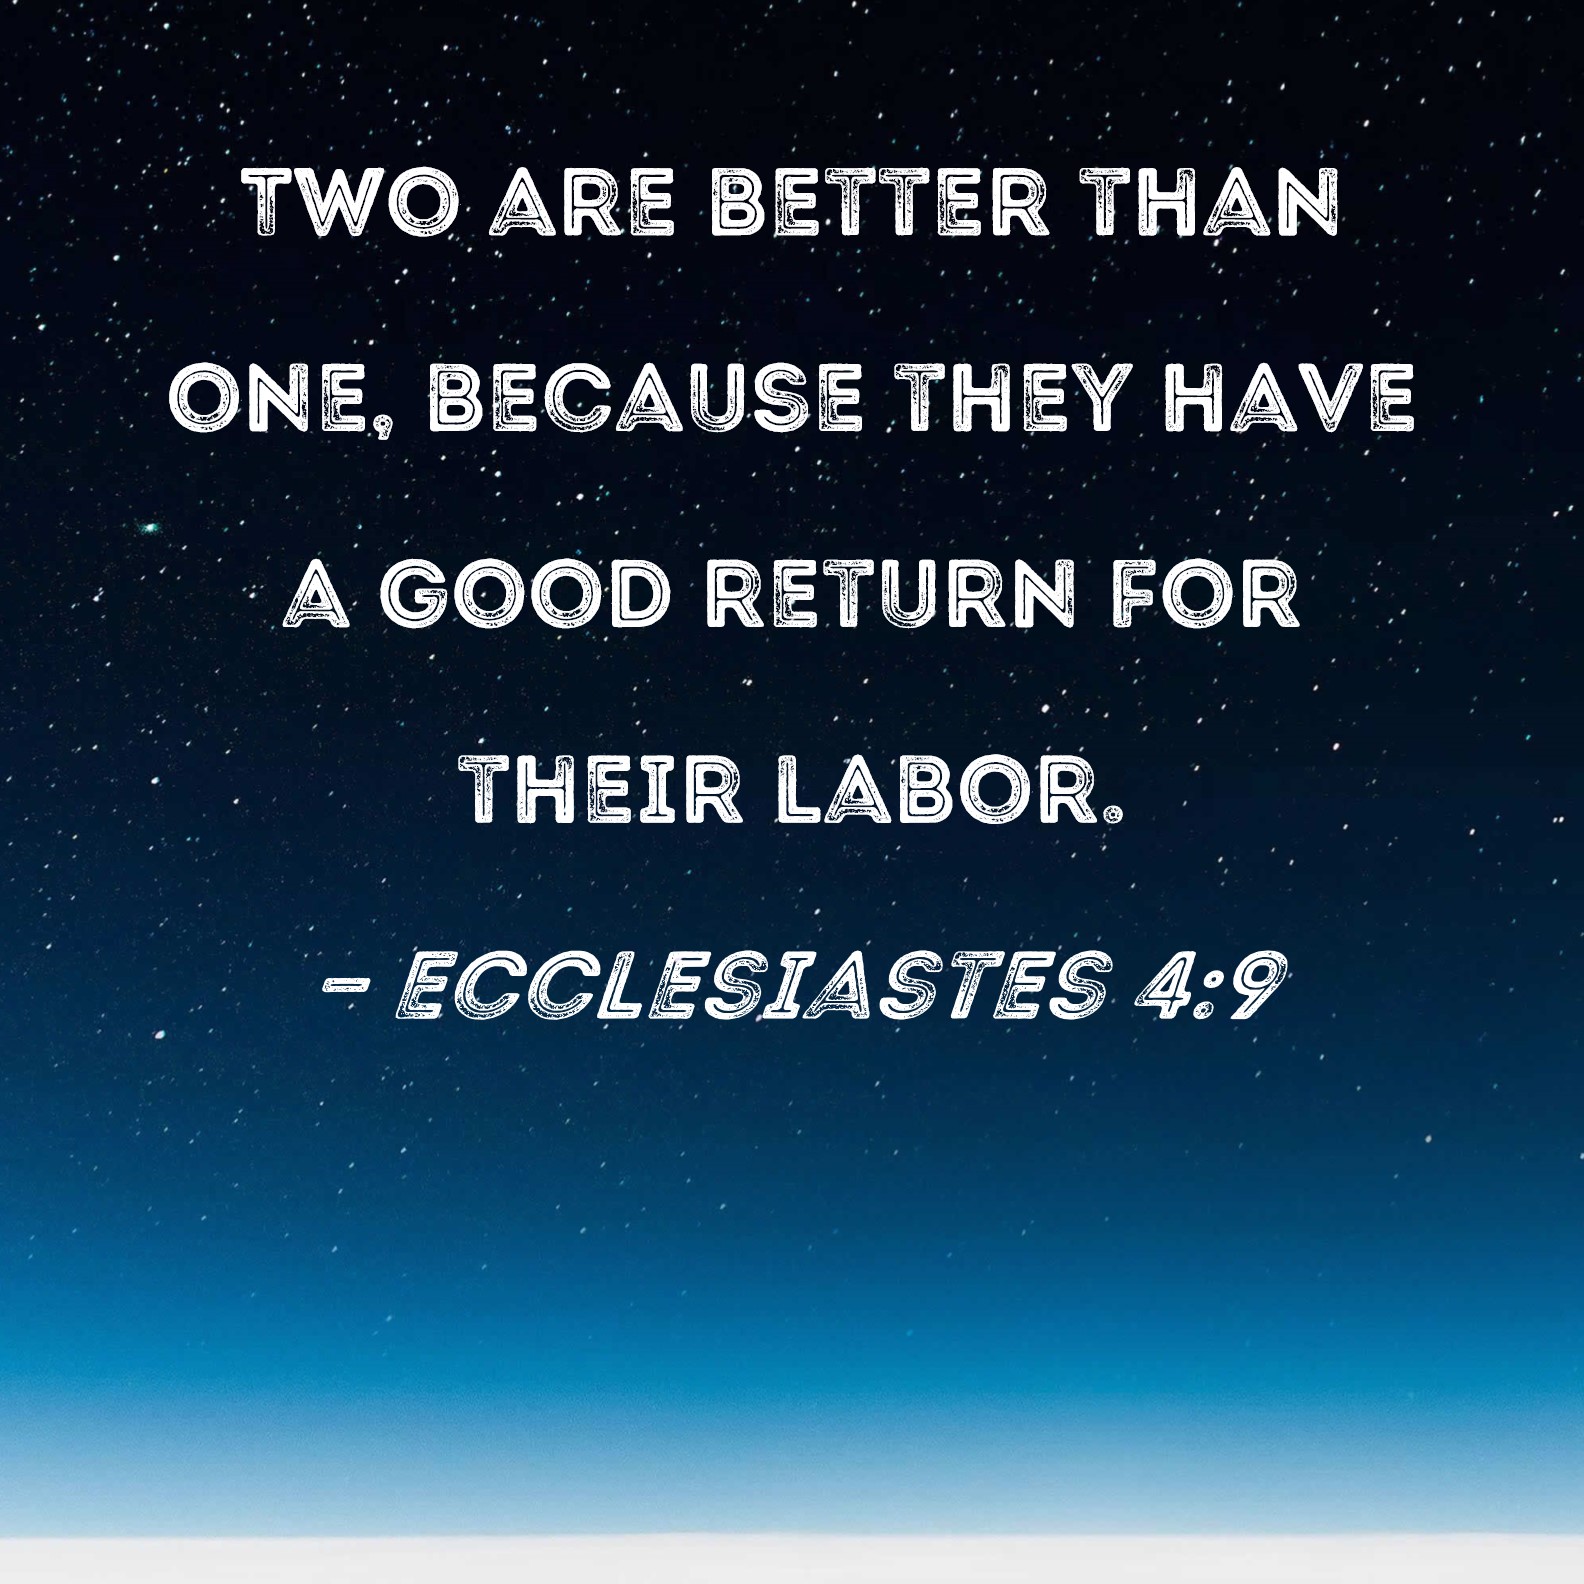 Ecclesiastes 4:9 Two are better than one, because they have a good